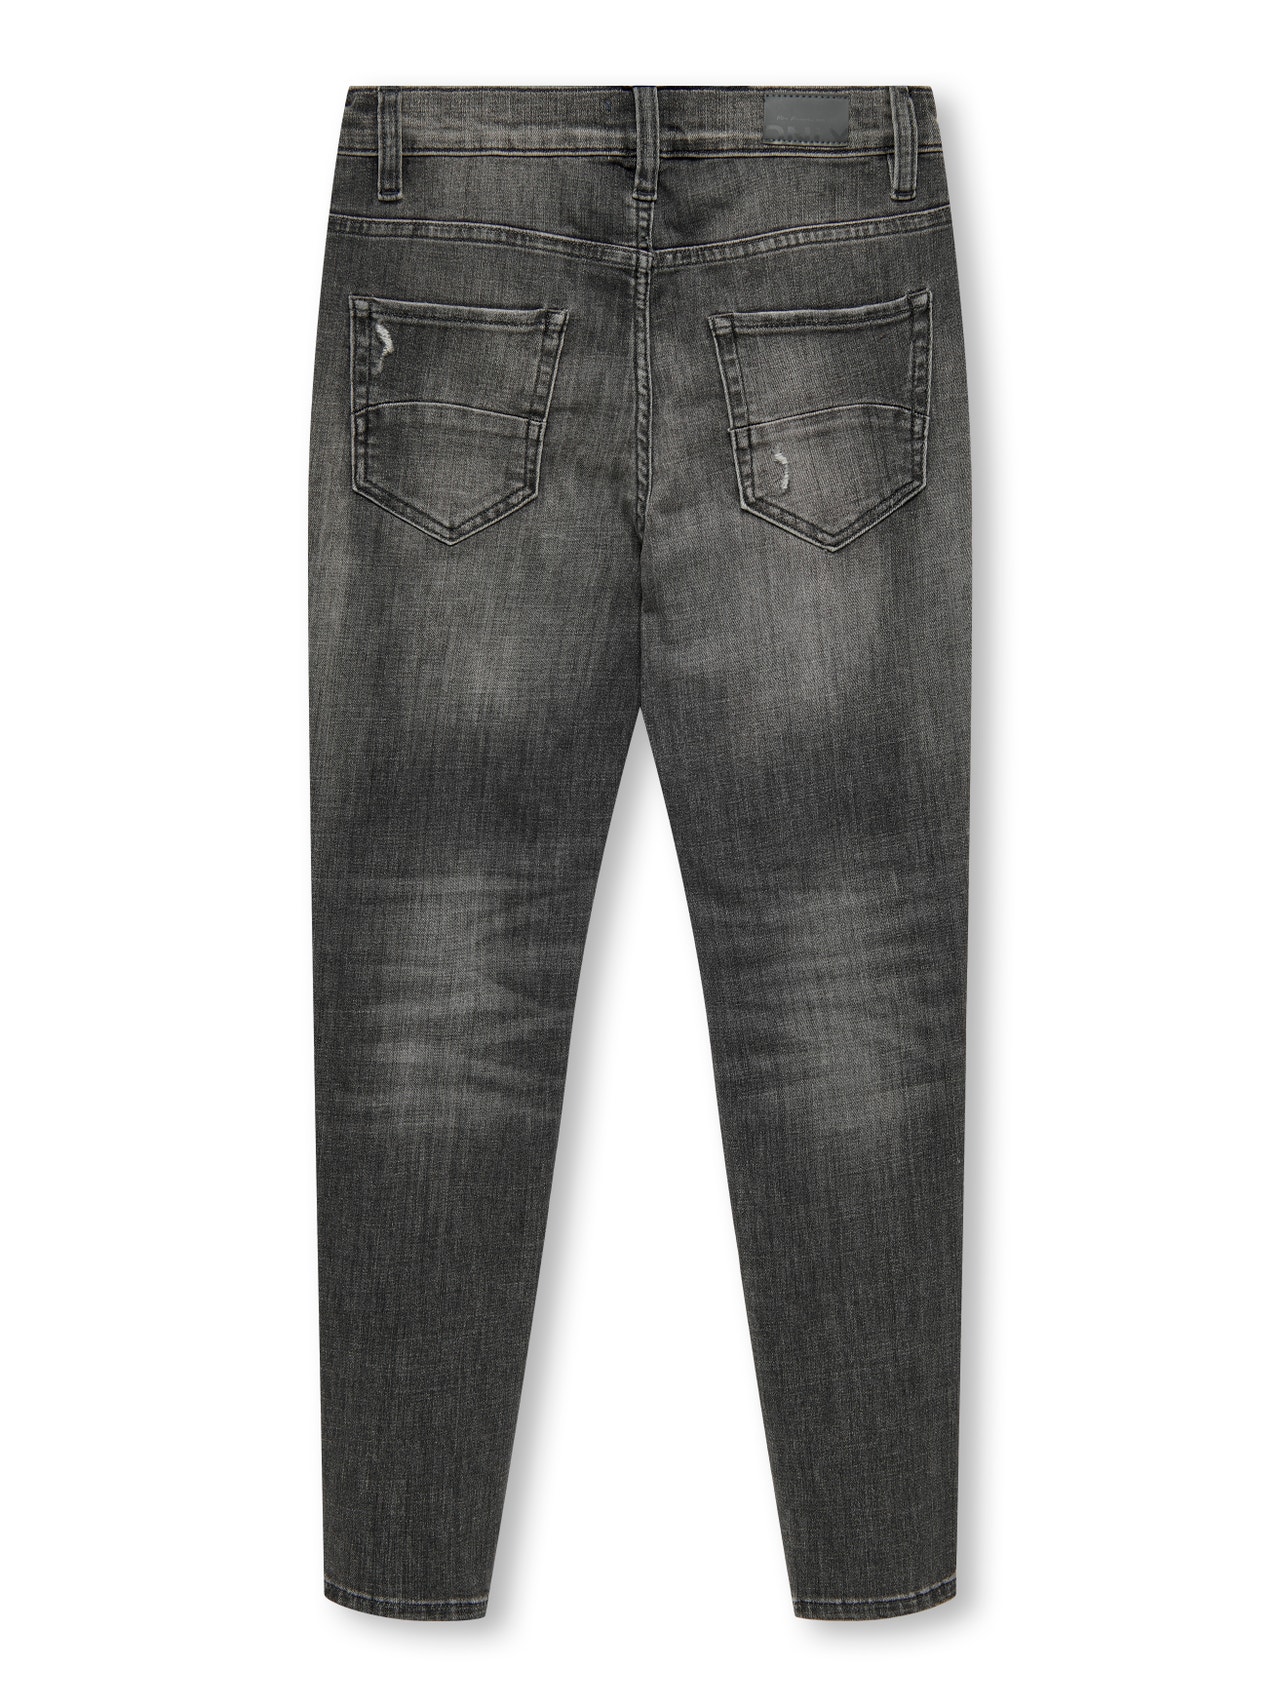 ONLY Jeans Tapered Fit -Dark Grey Denim - 15268627